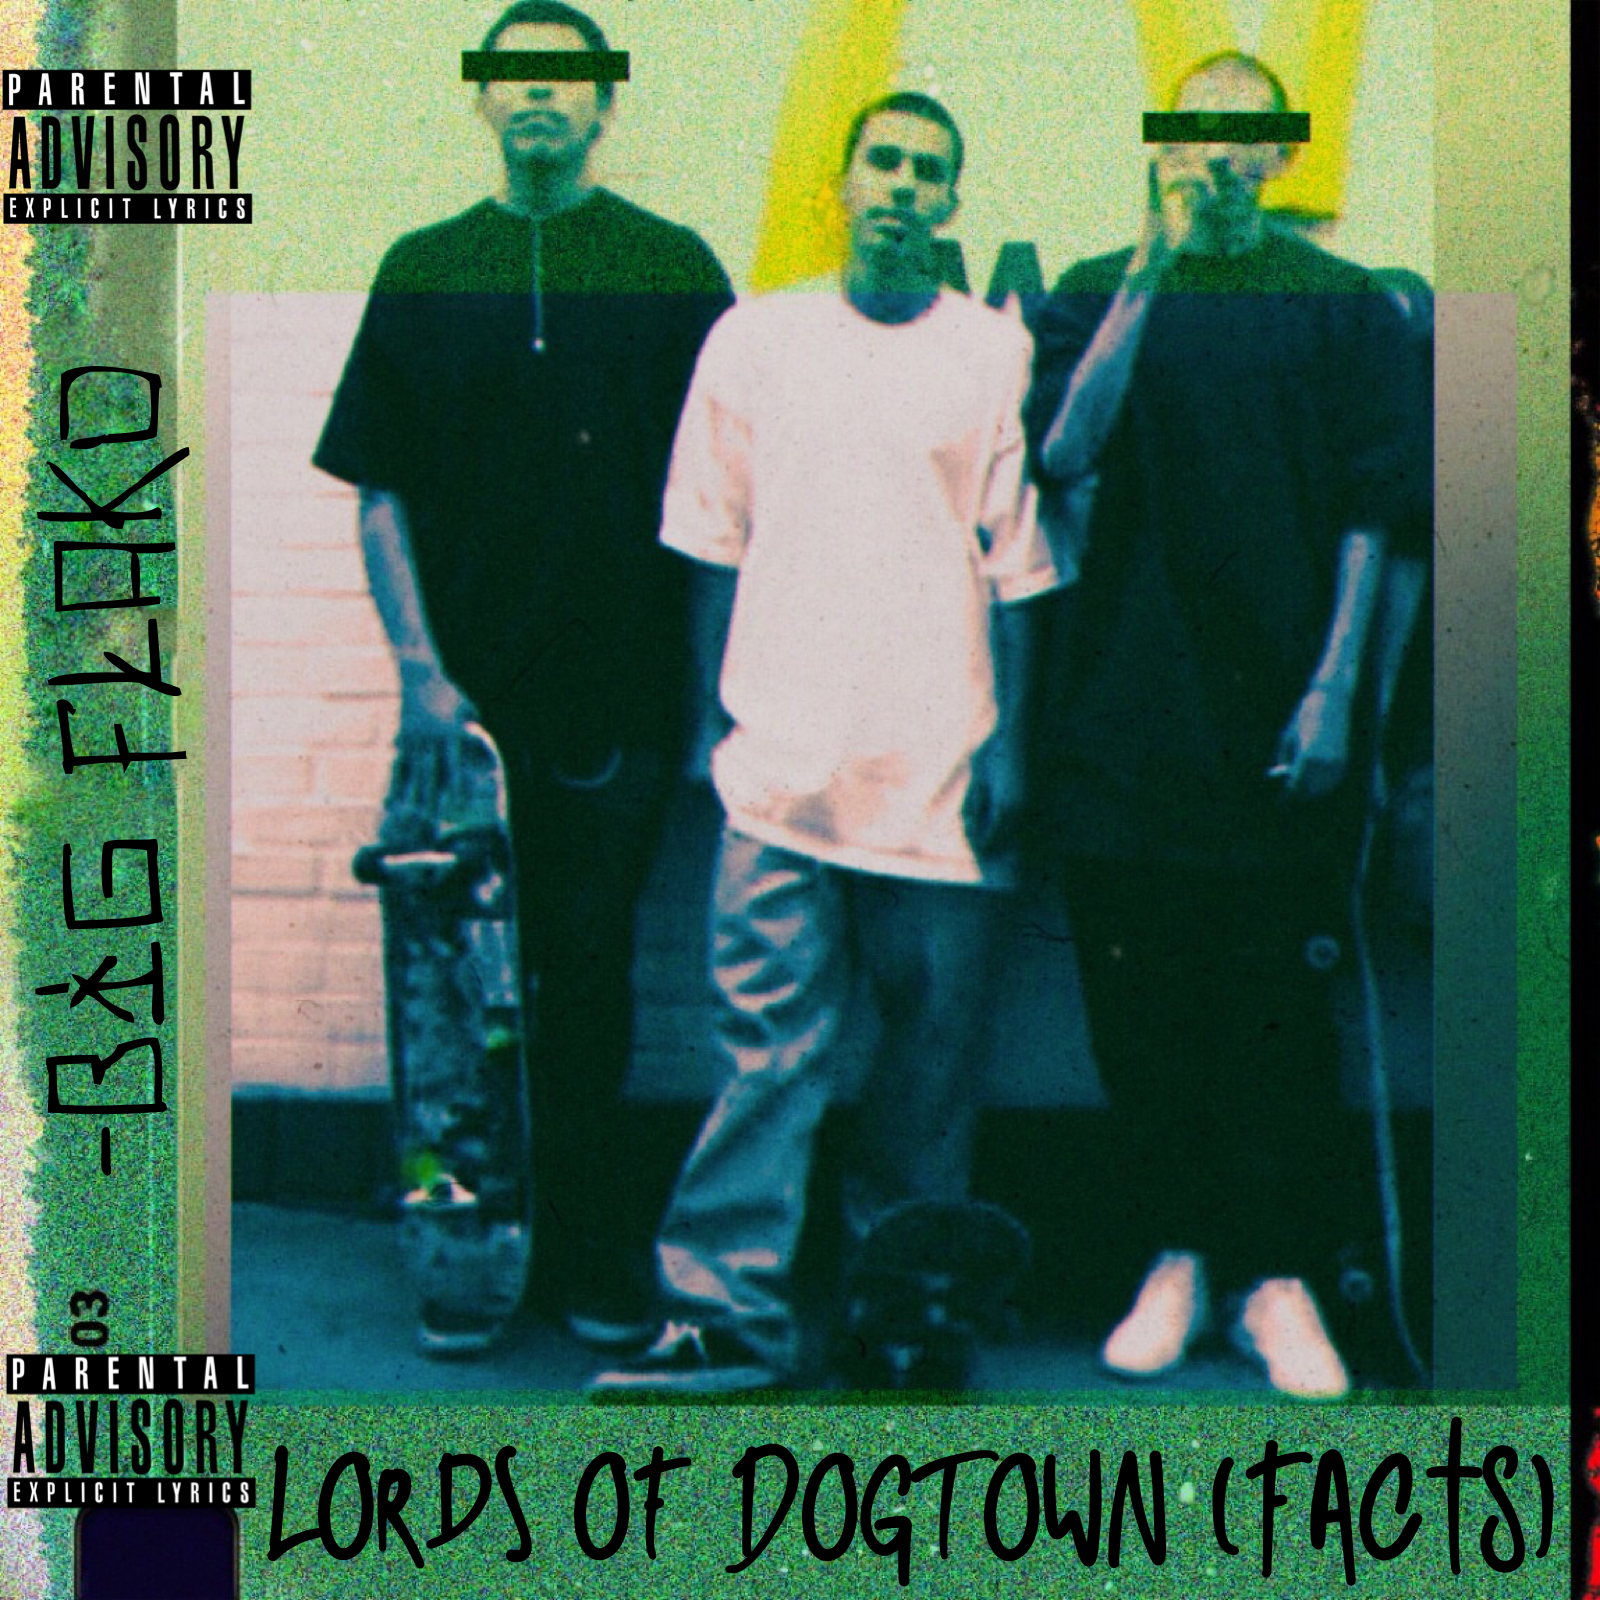 Lords of Dogtown (Facts) by Big Flako